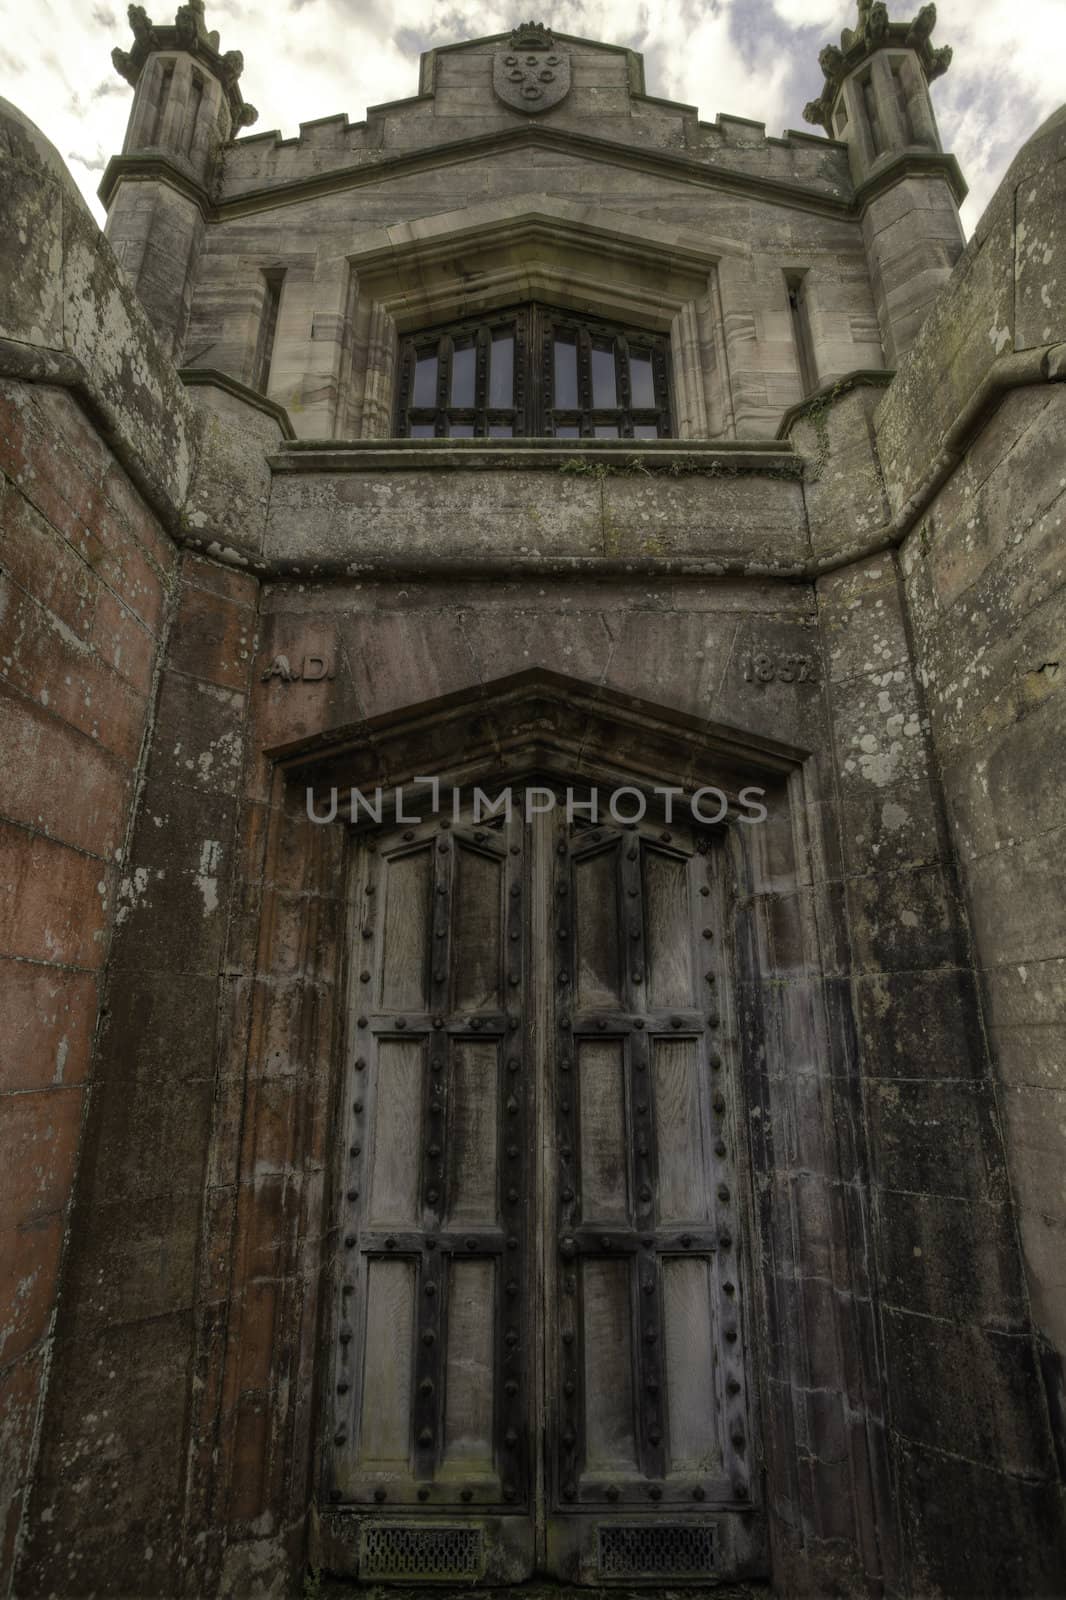 The mausoleum of William, Second Earl of Lowther.The mausoleum of William, Second Earl of Lowther, in the graveyard of St Michael's Church, Lowther, Cumbria, England UK